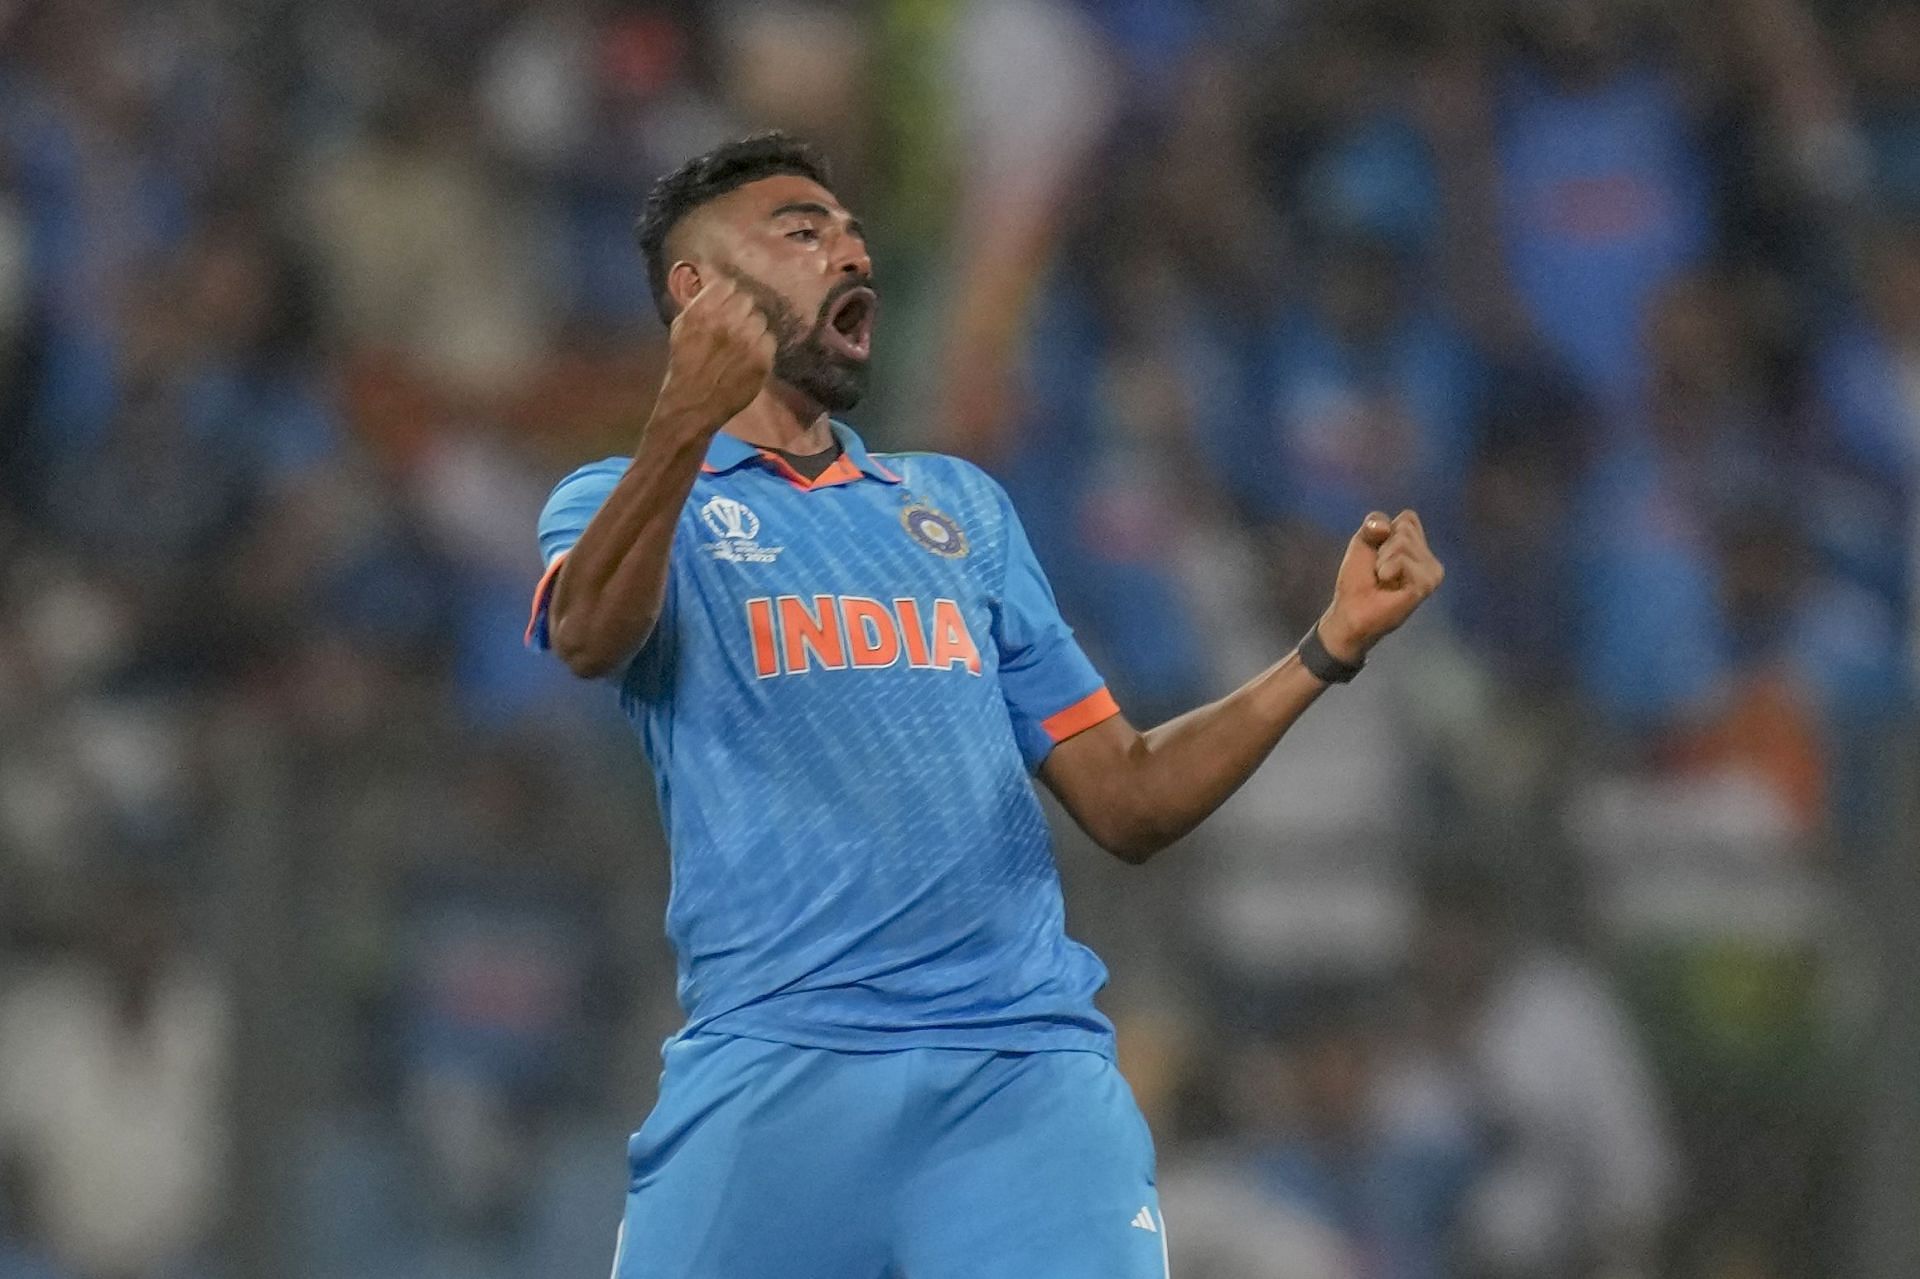 Mohammed Siraj dismantled the Sri Lankan batting lineup in the Asia Cup final as well. [P/C: AP]